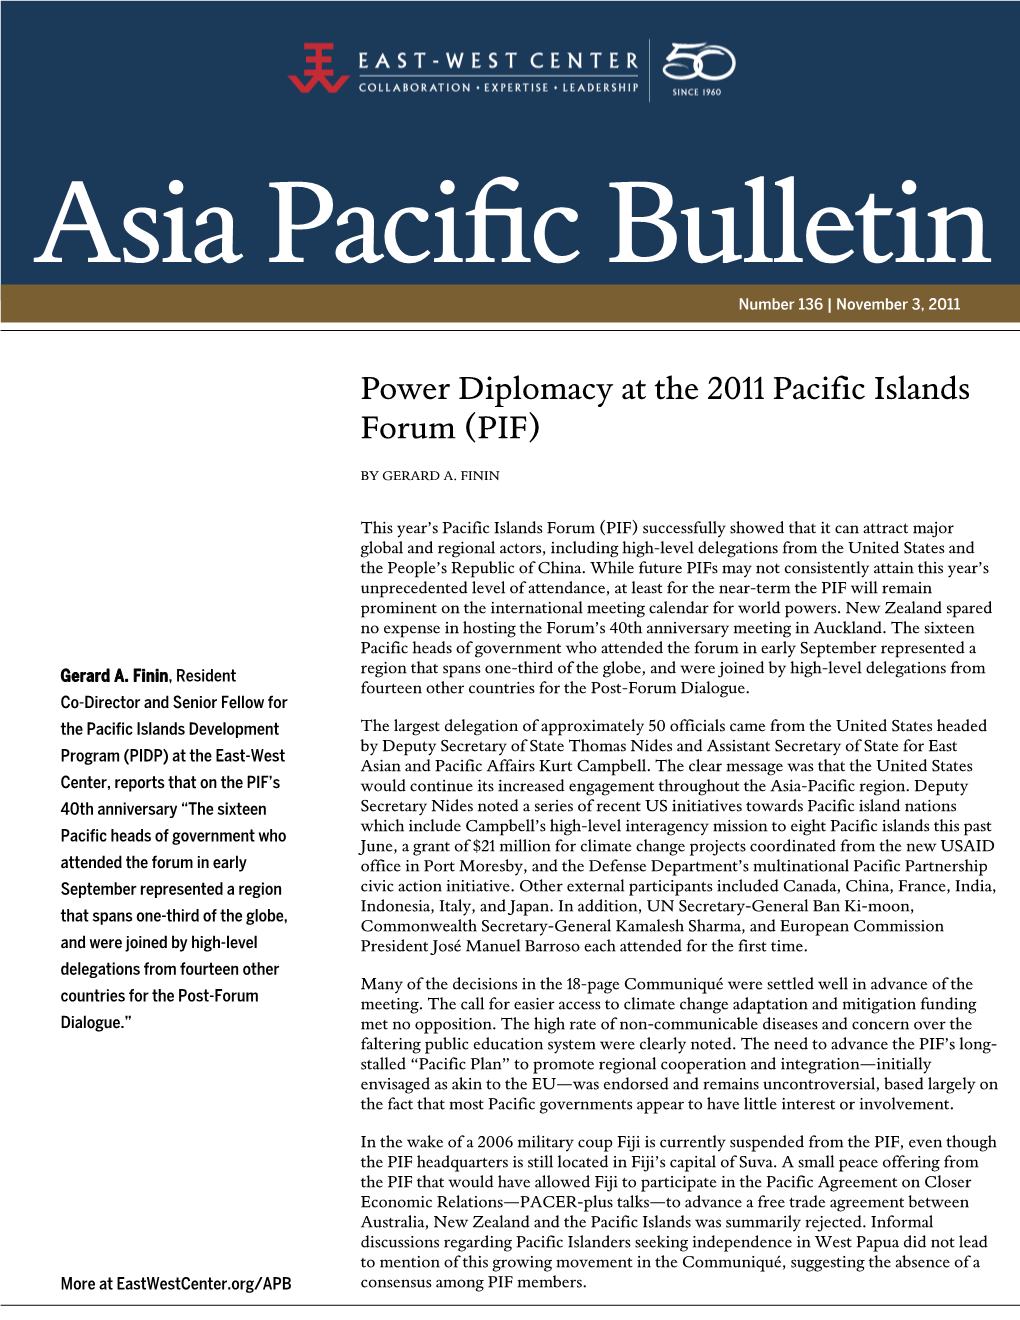 Power Diplomacy at the 2011 Pacific Islands Forum (PIF)